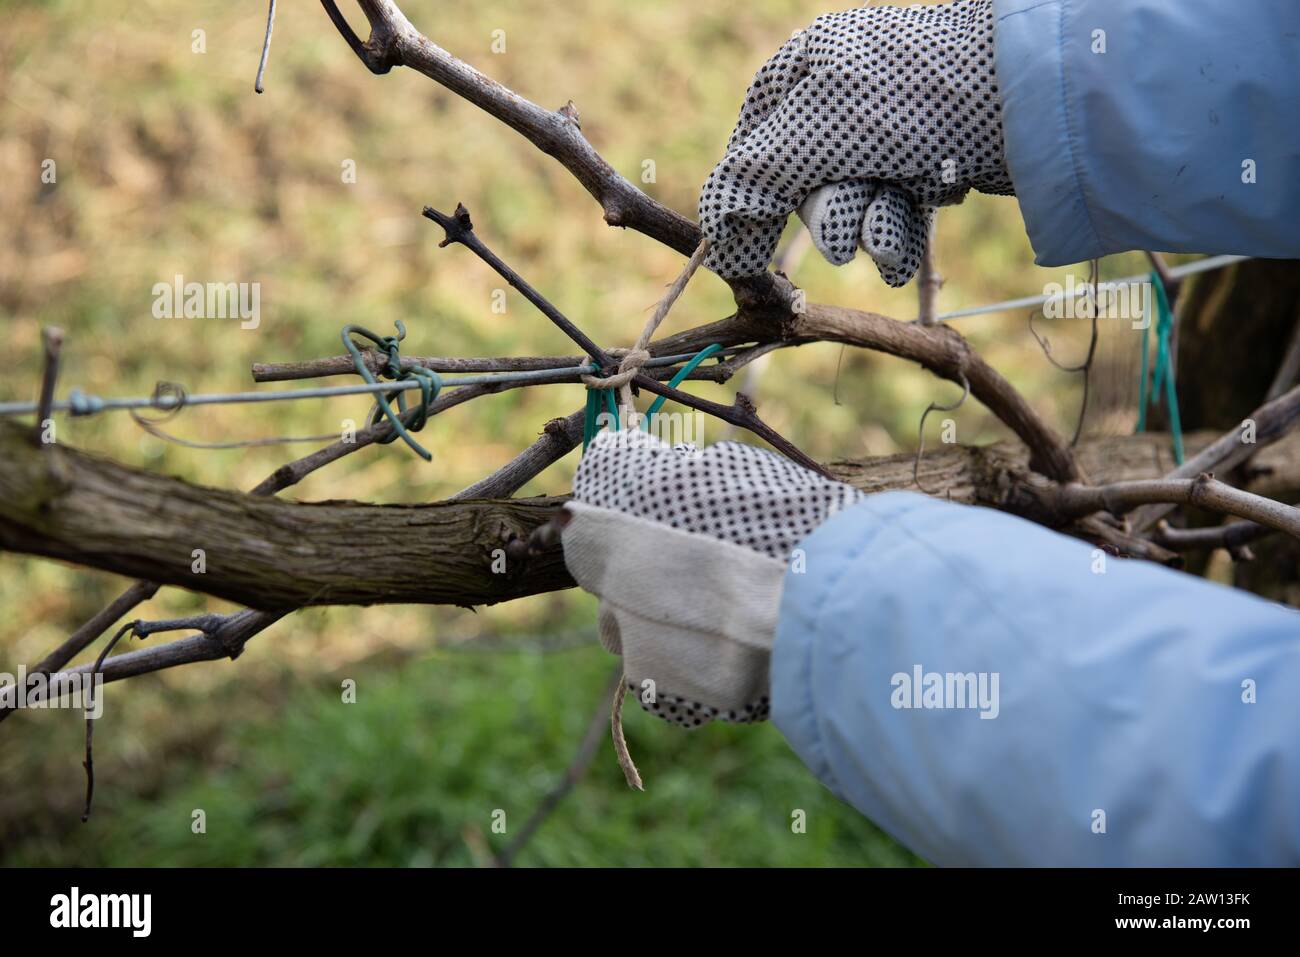 Tying a grapevine branch to the brackets Stock Photo